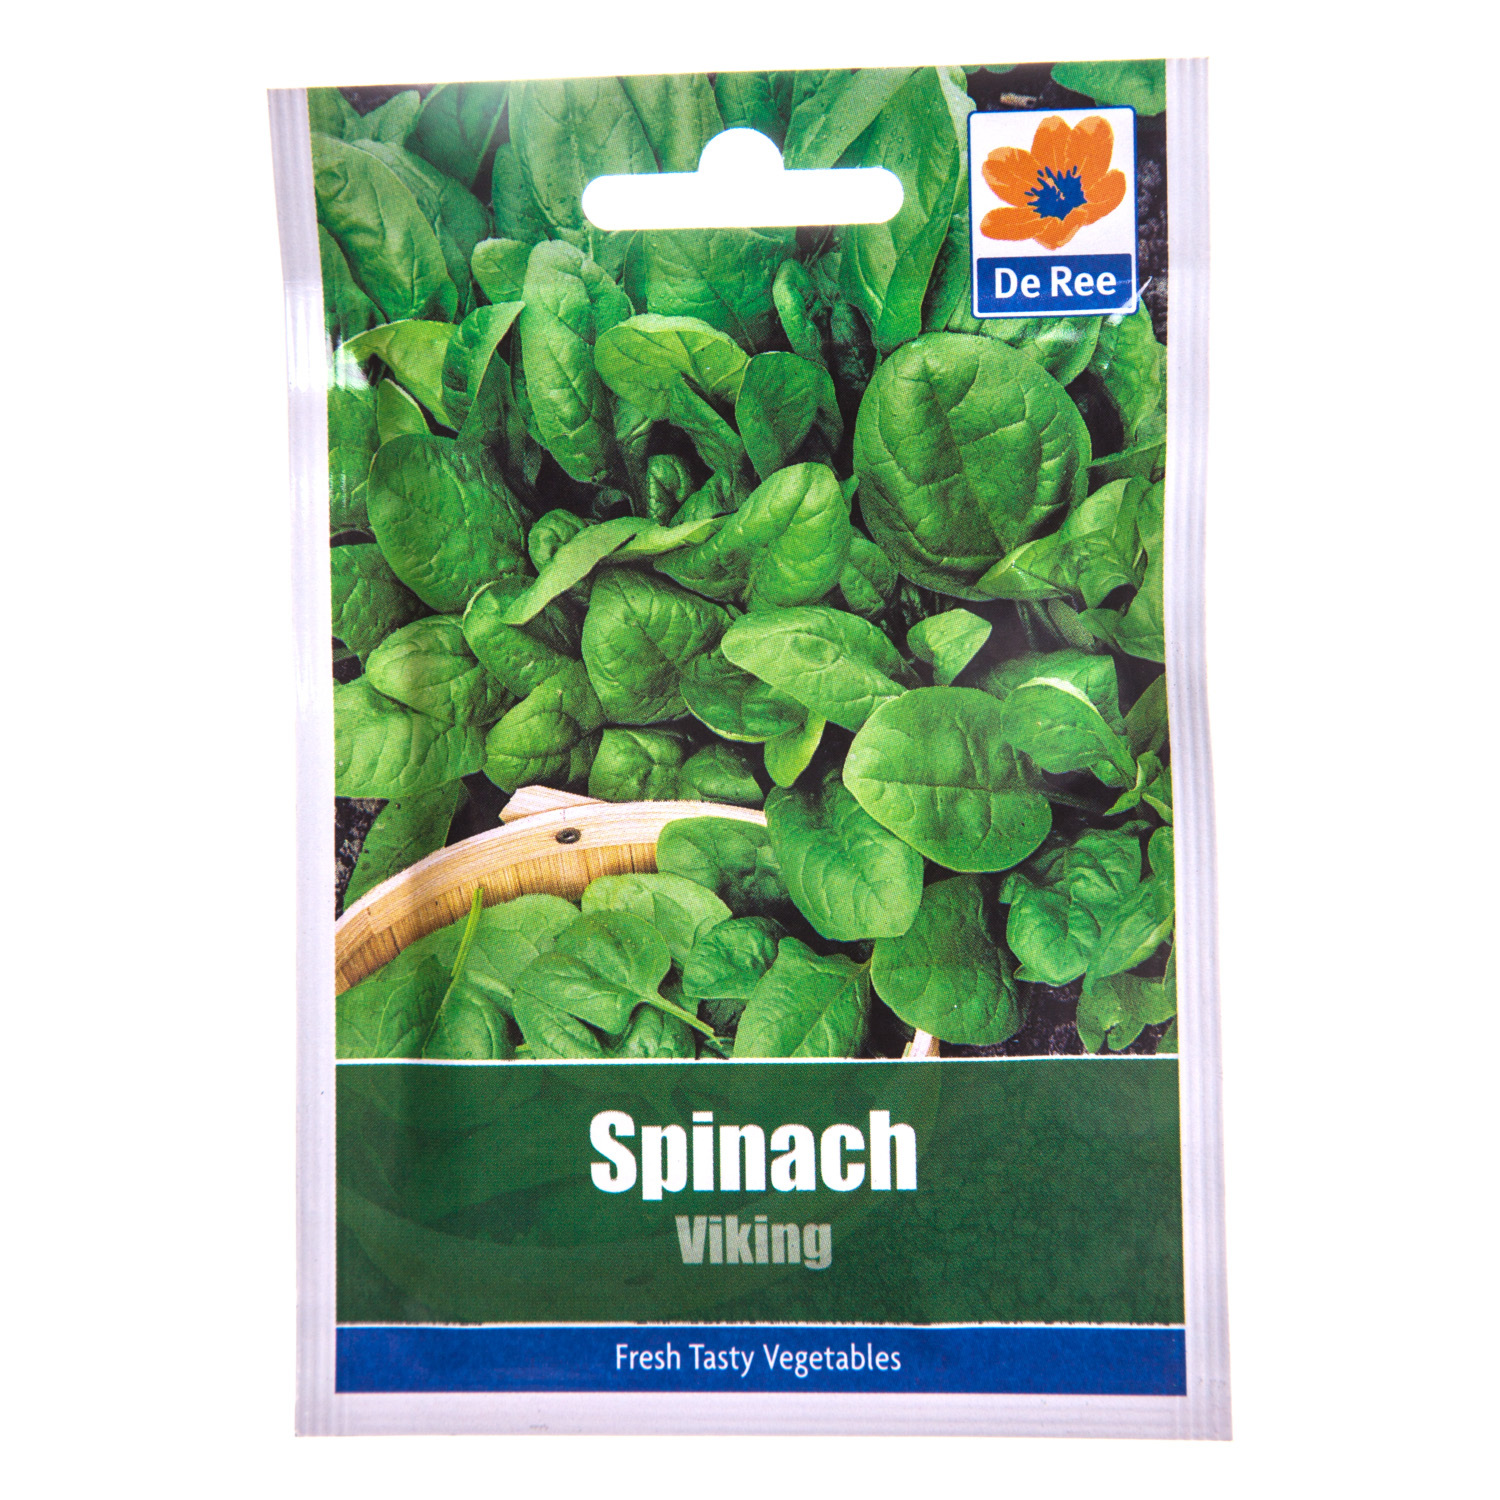 Viking Spinach Seed Packet - Green Image